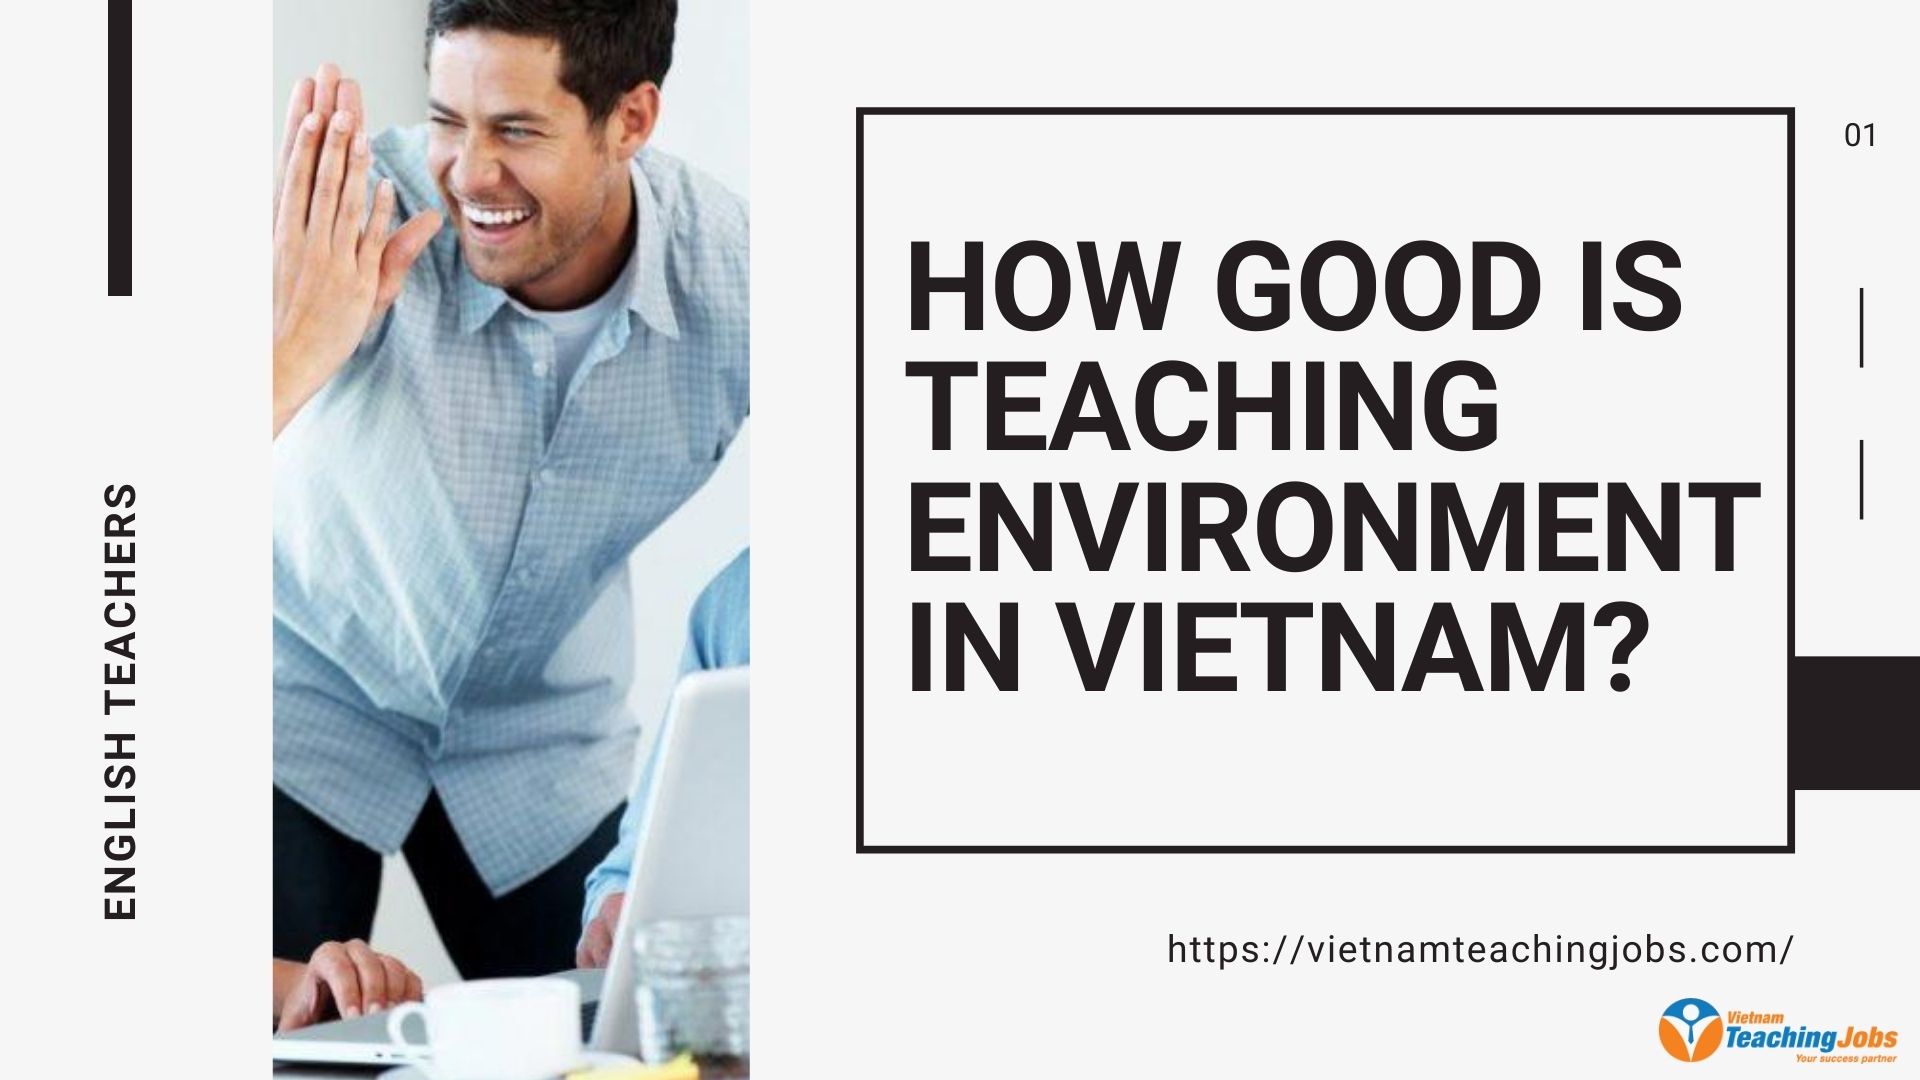 HOW GOOD IS ENGLISH TEACHING ENVIRONMENT IN VIETNAM?